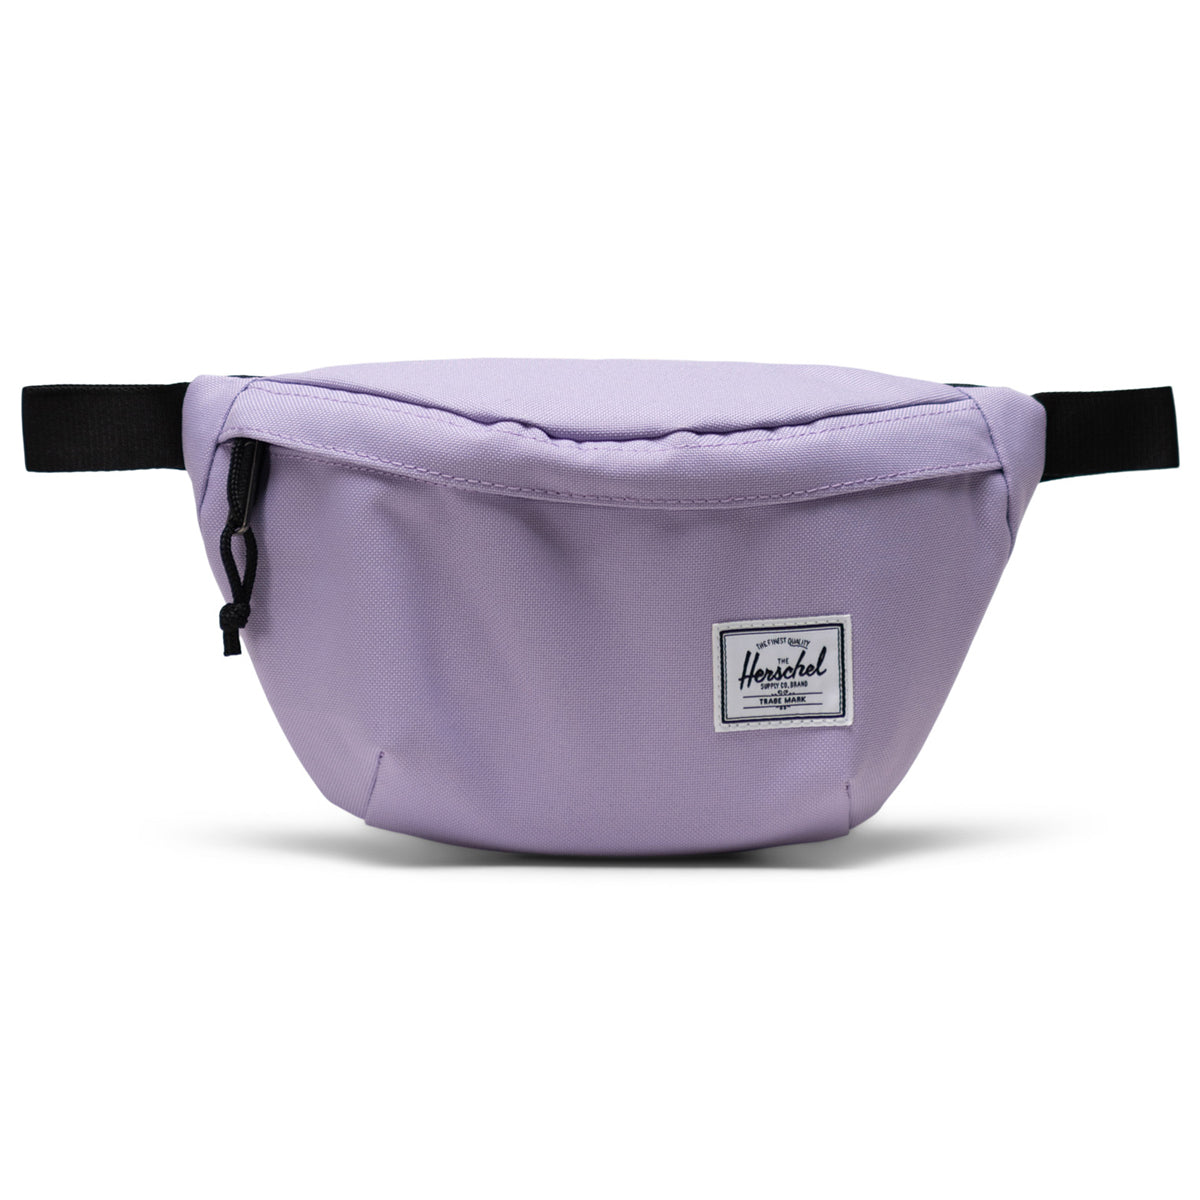 Herschel Supply Classic Hip Pack Backpack - Purple Rose image 1